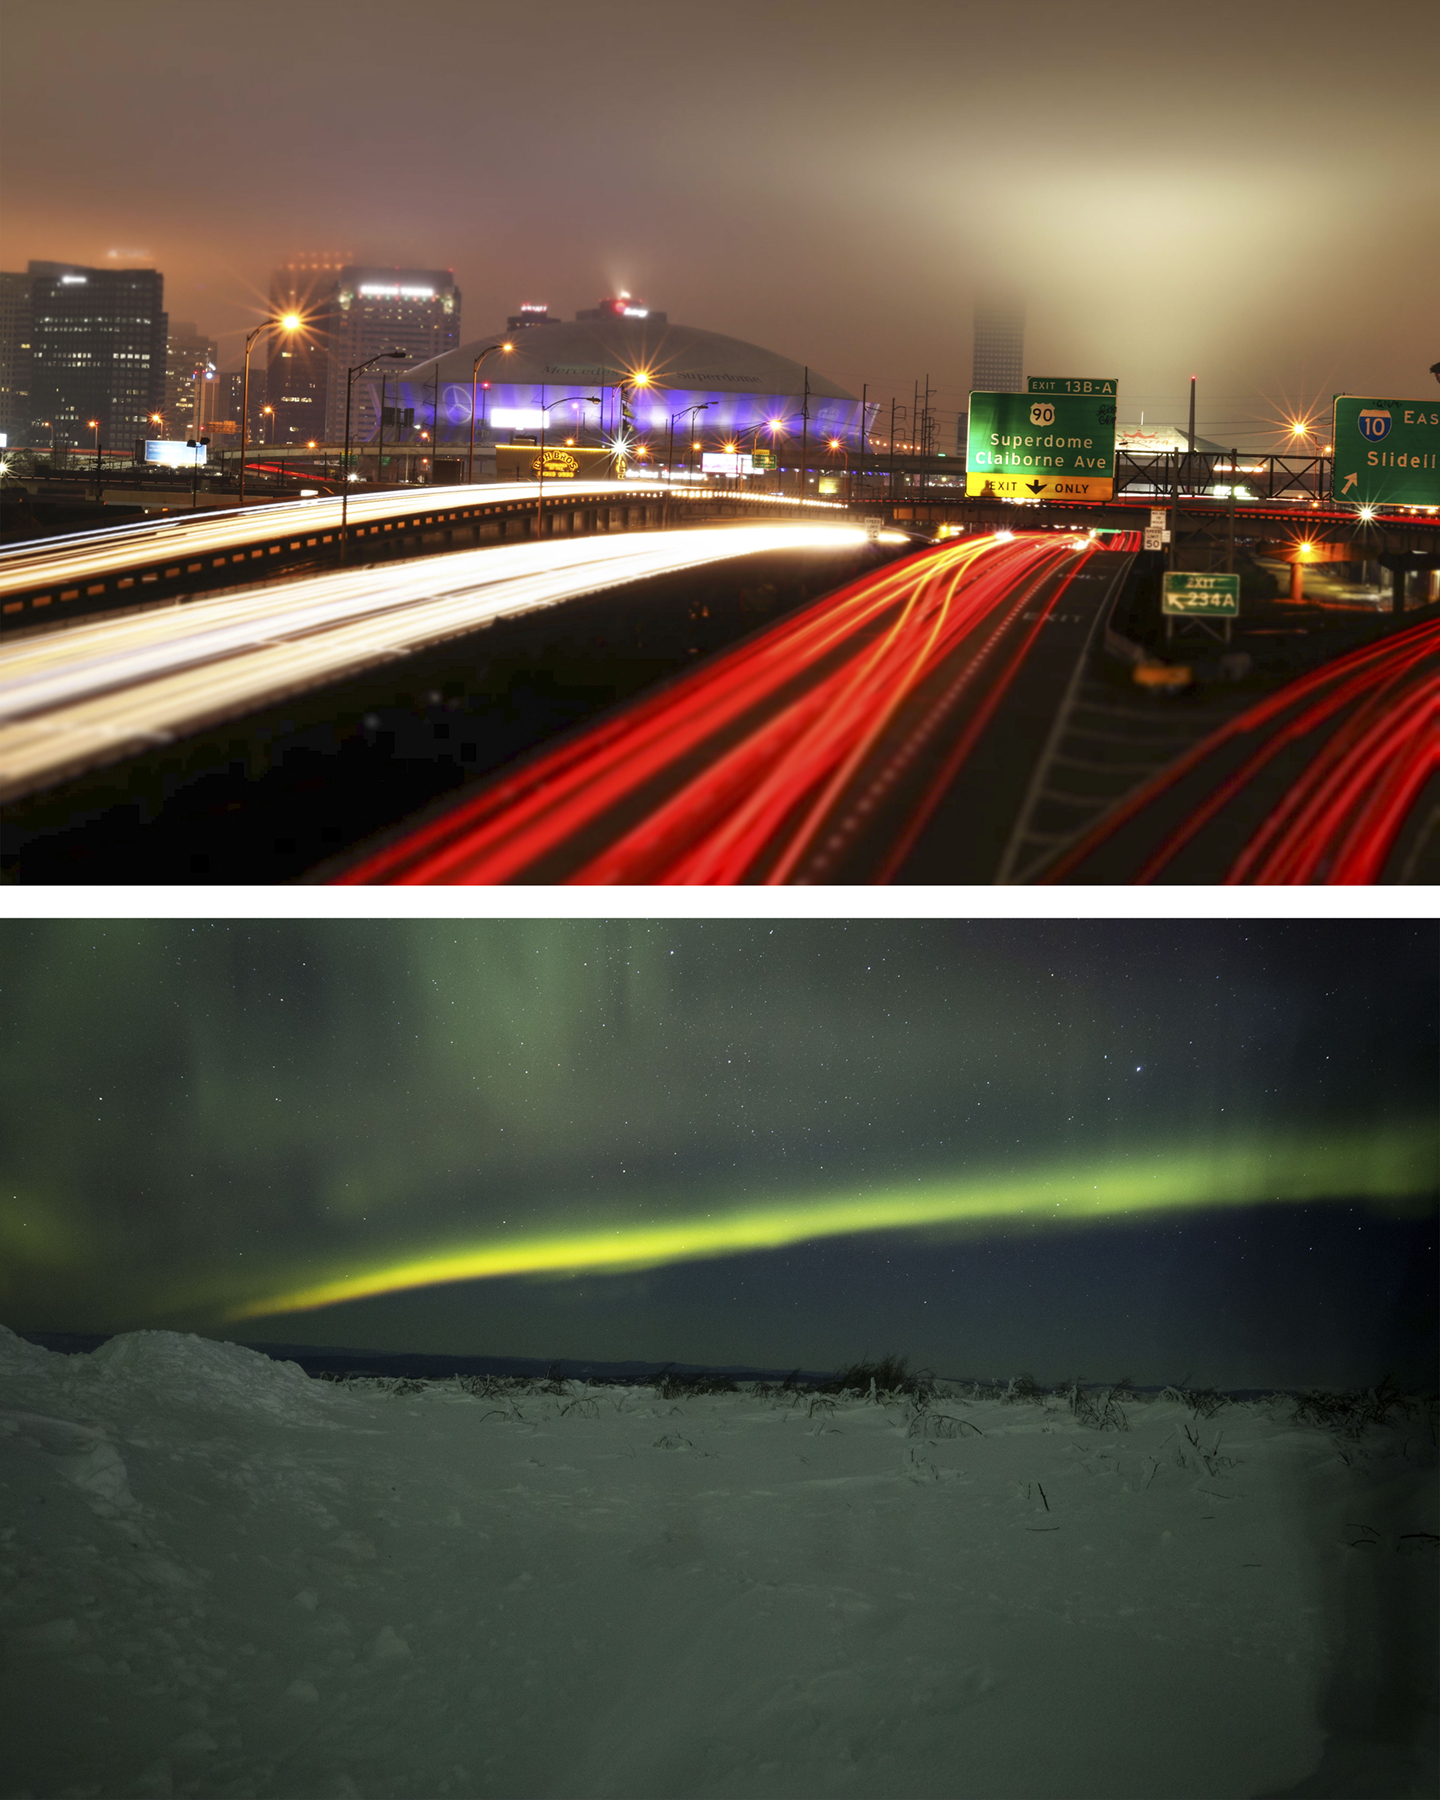 Light trails from traffic in Louisiana and the northern lights in Alaska, courtesy of the artist